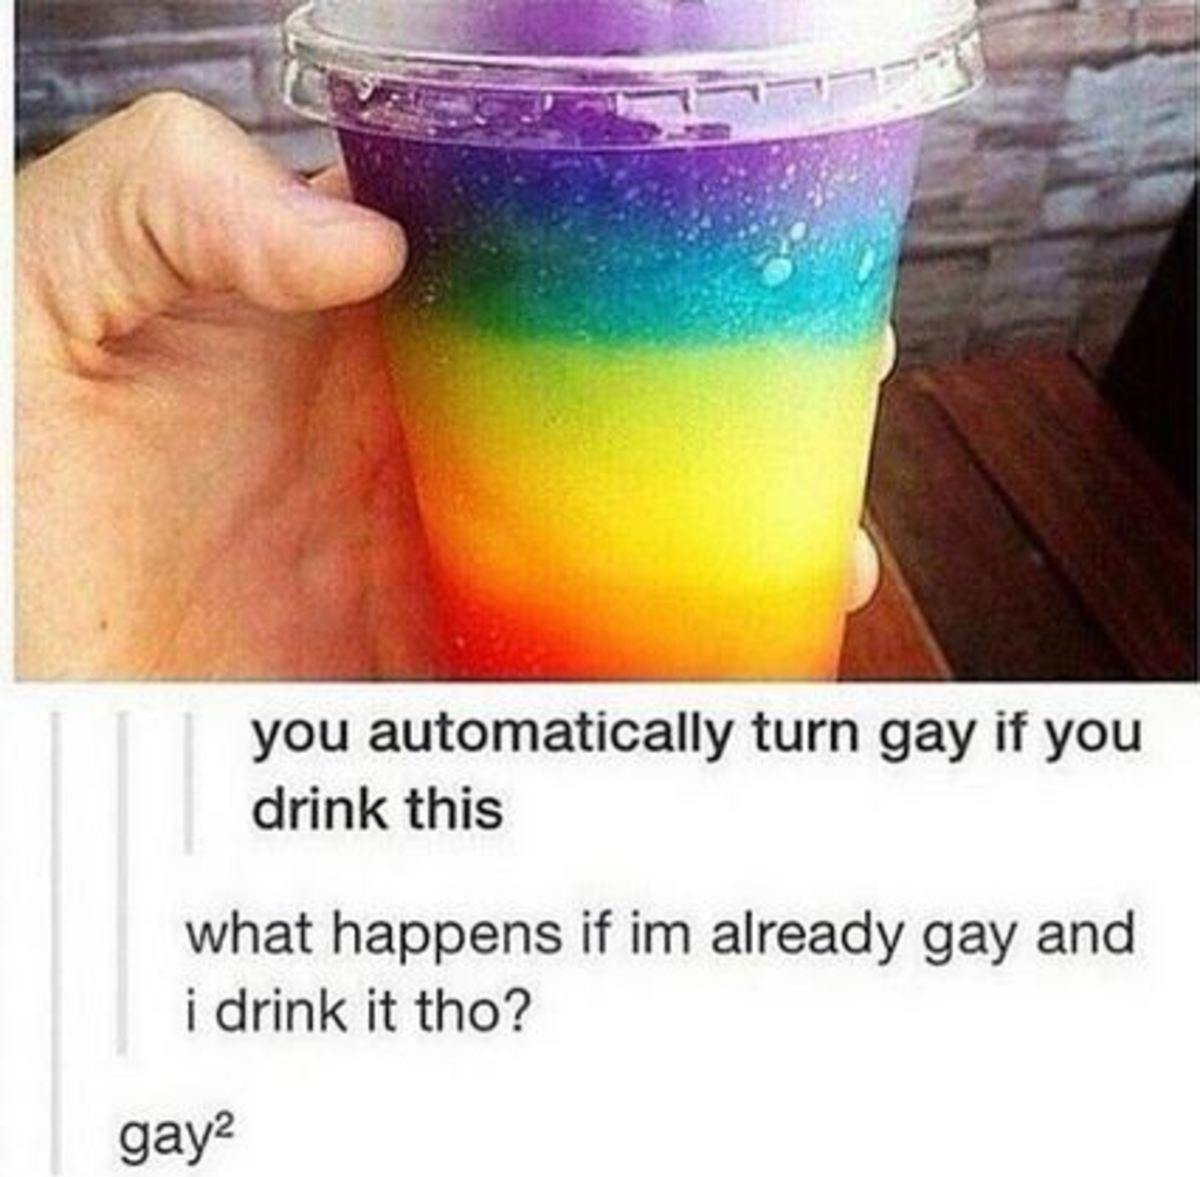 if you drink this you turn gay - you automatically turn gay if you drink this what happens if im already gay and i drink it tho? gay2